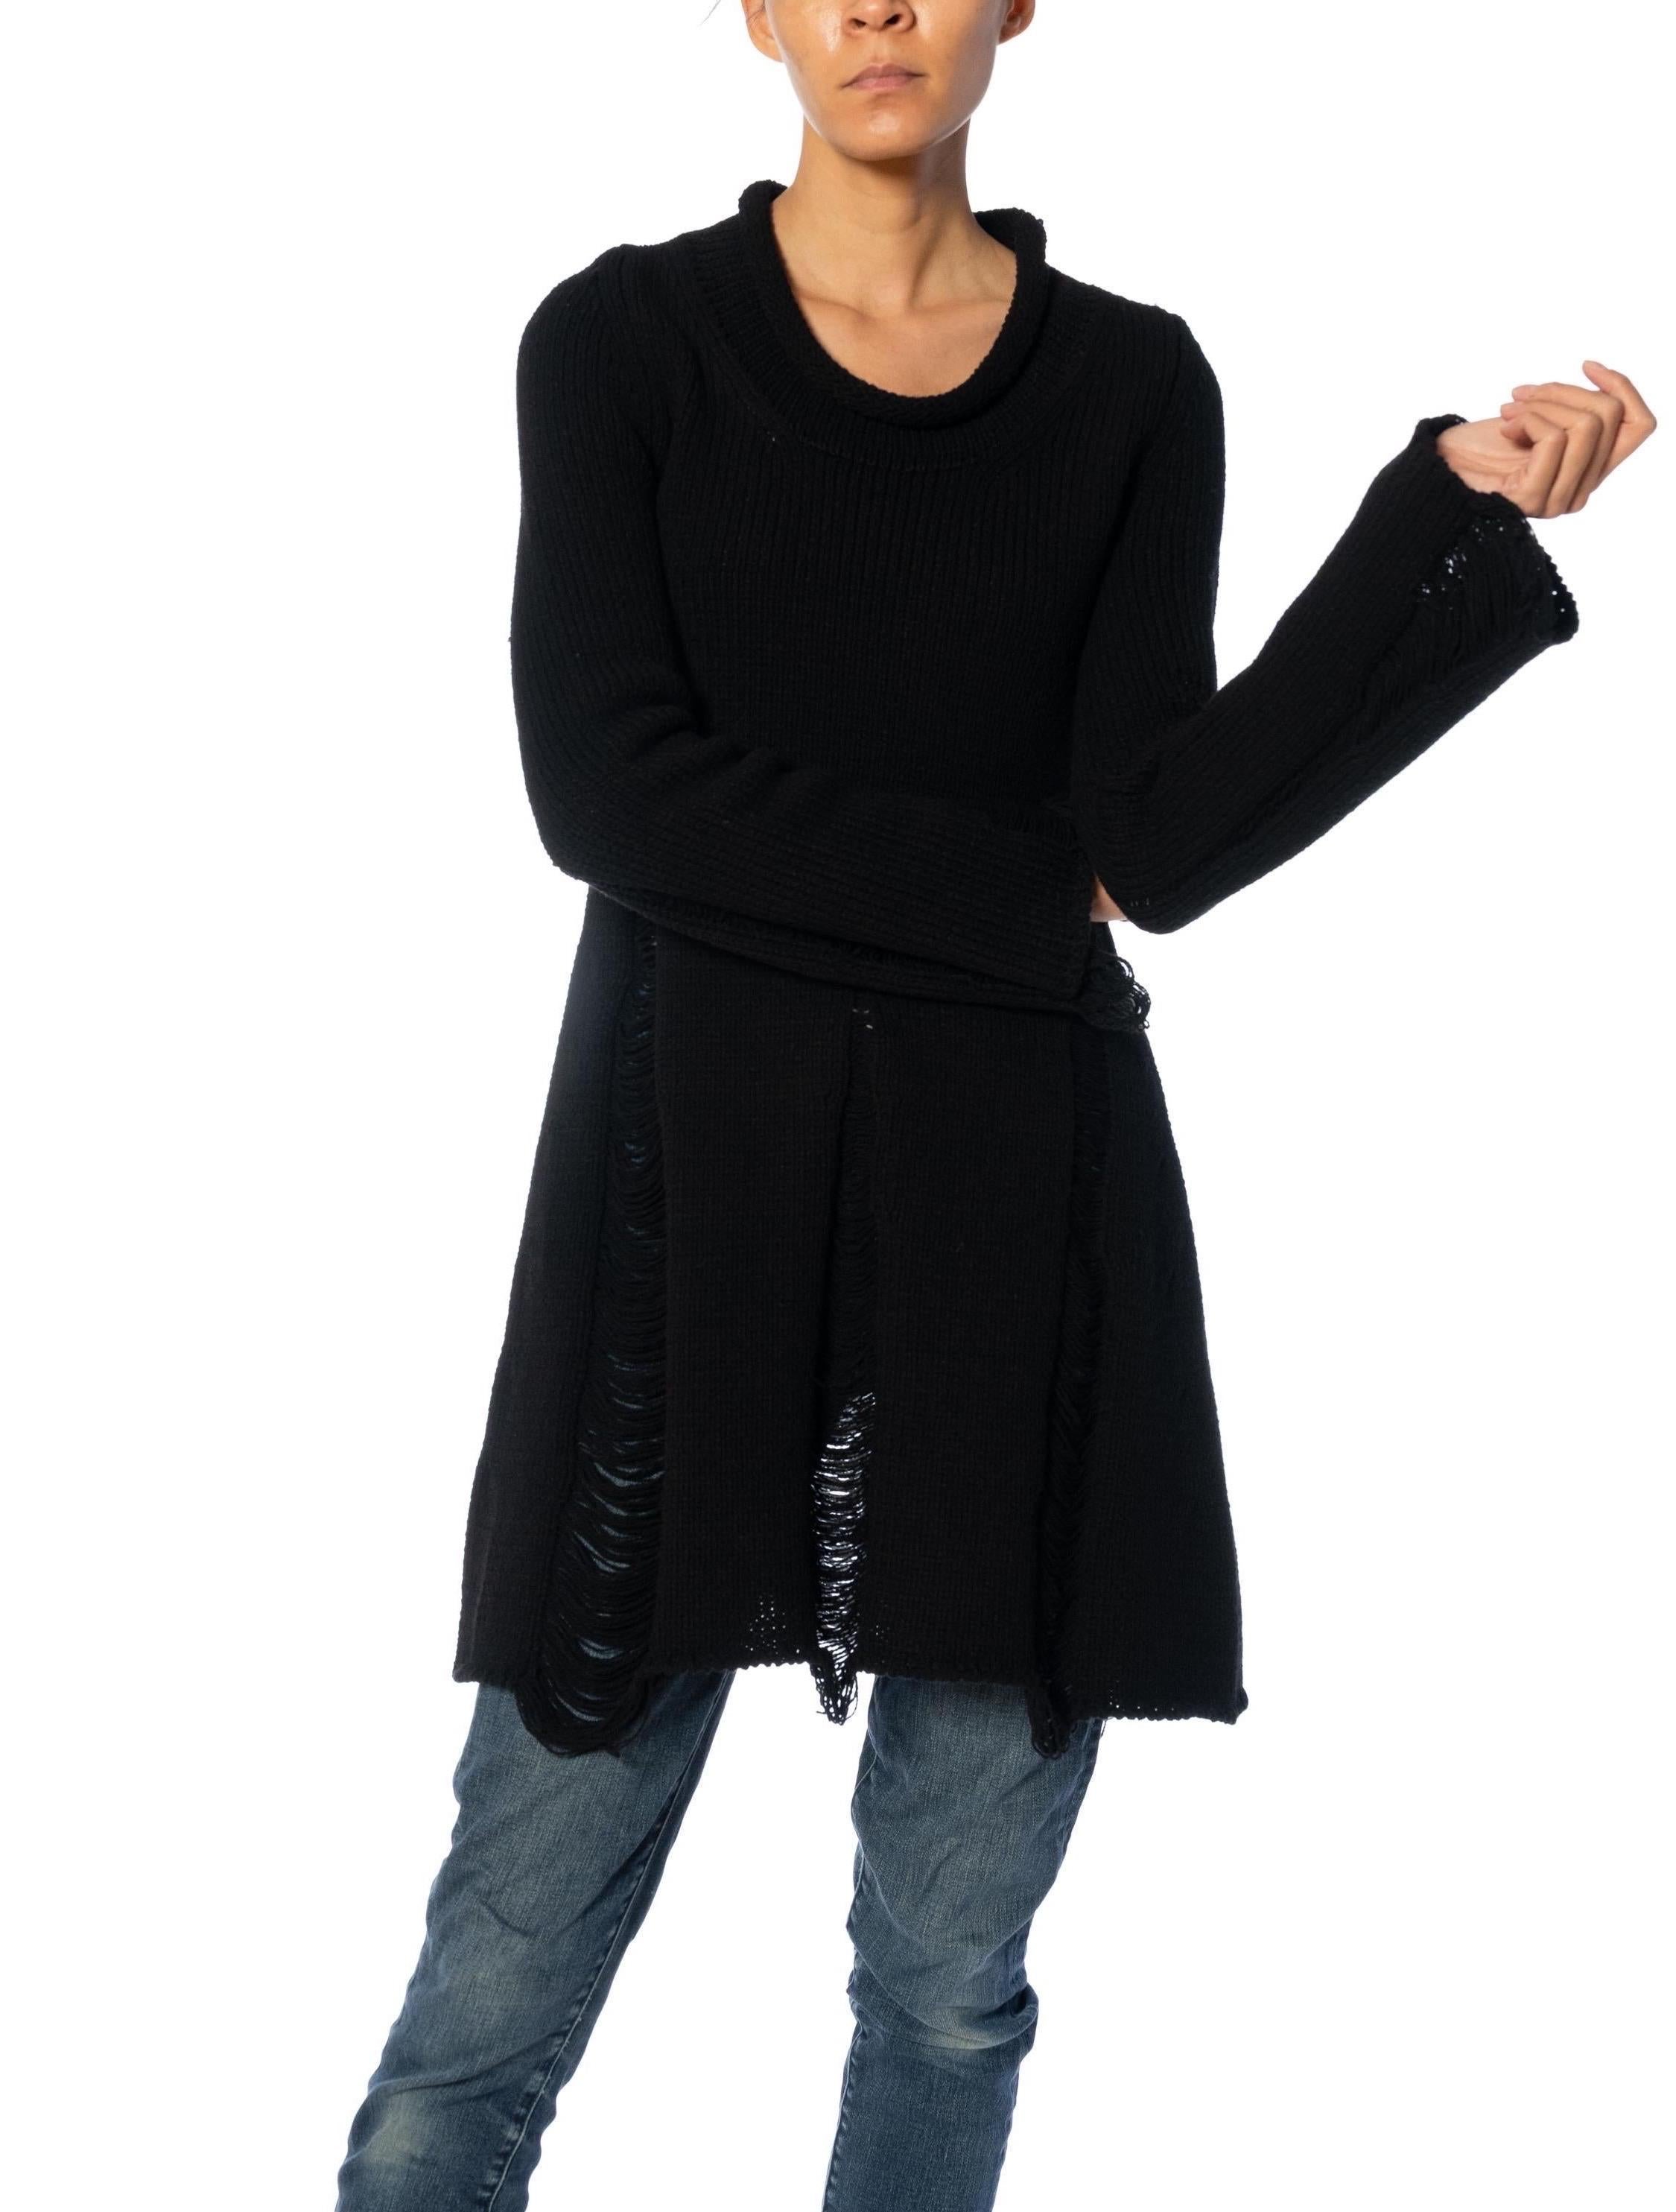 1990S LIMI Black Wool & Poly Knit Distressed Sweater Dress In Excellent Condition For Sale In New York, NY